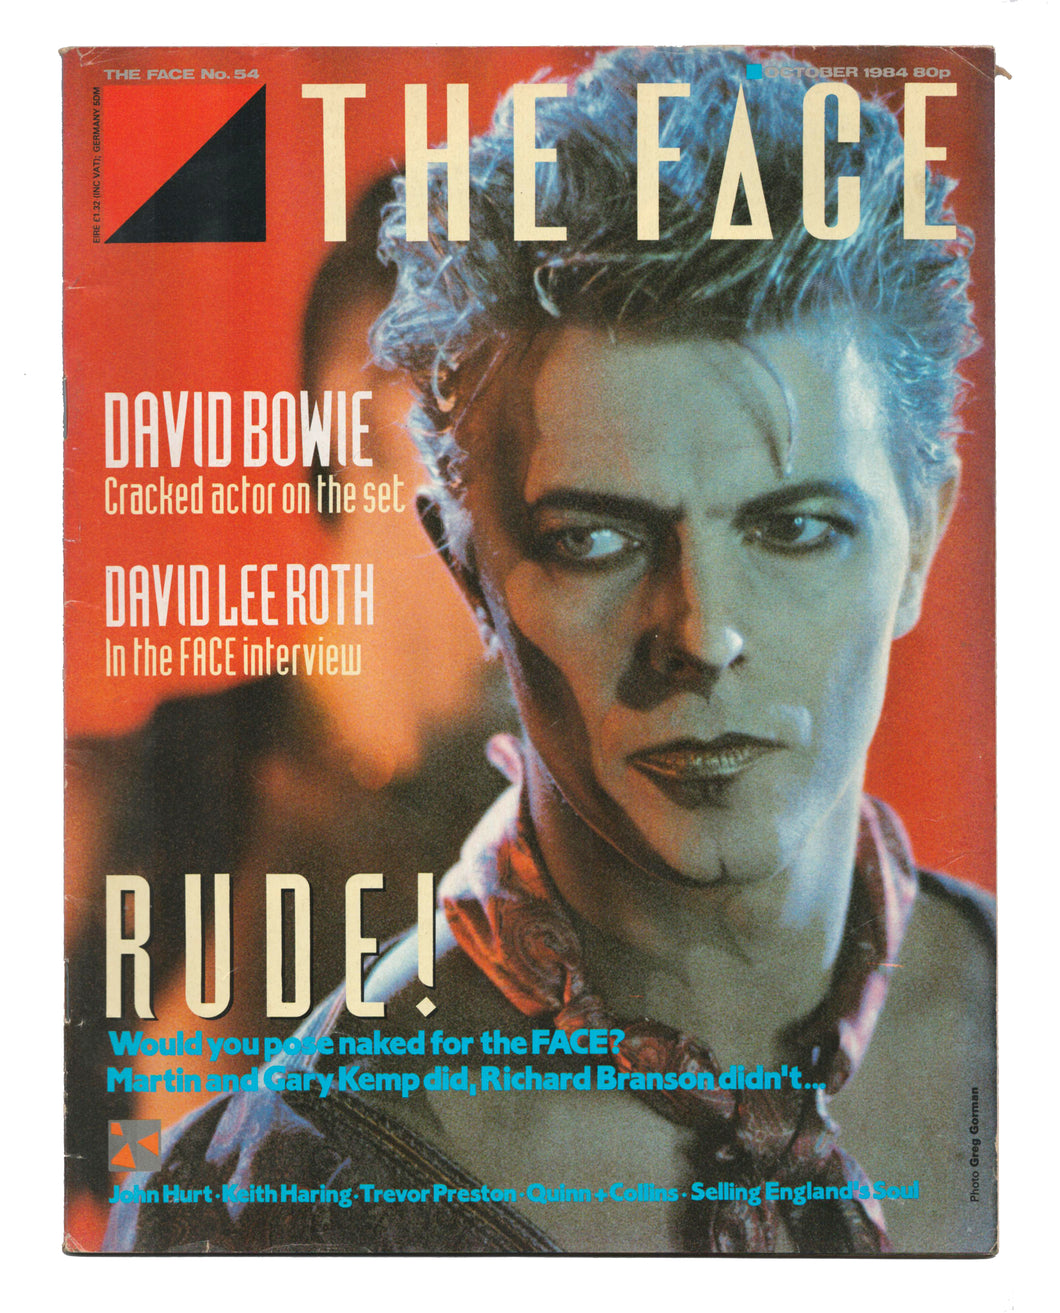 The Face No 54 Oct 1984